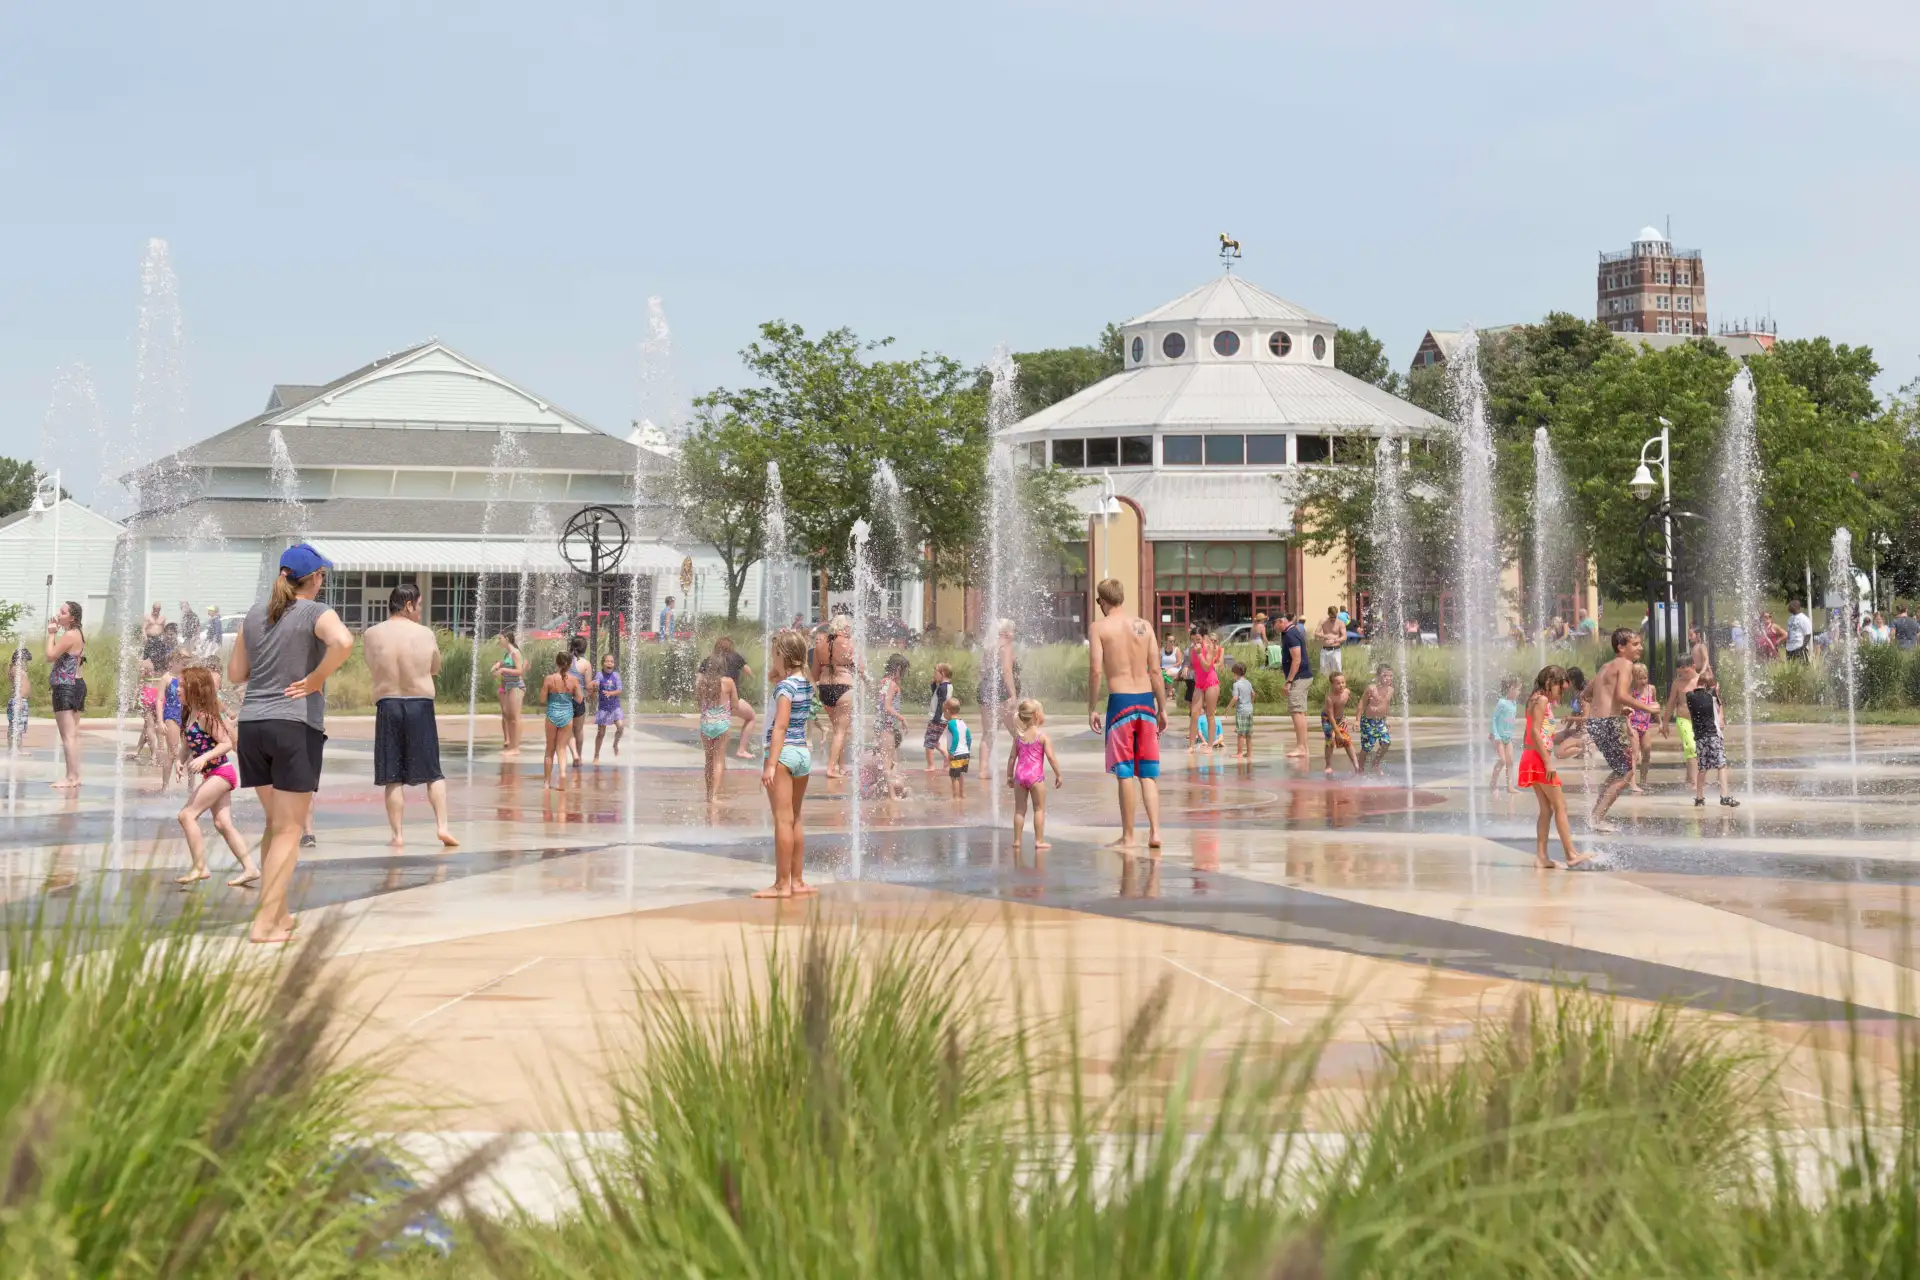 children playing at the Whirlpool Compass fountain